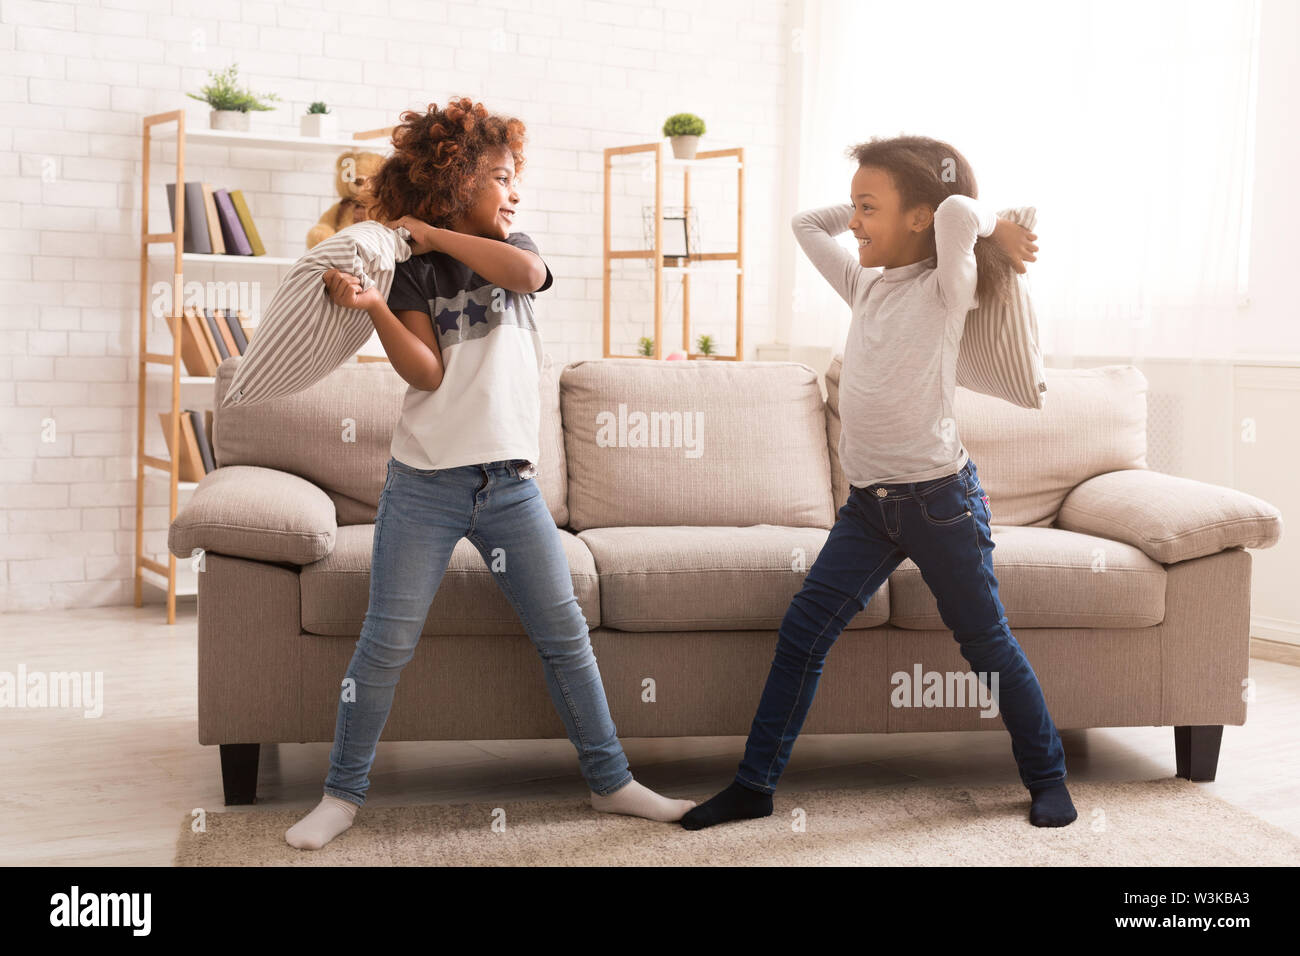 African-american girls having fun, fighting with pillows Stock Photo